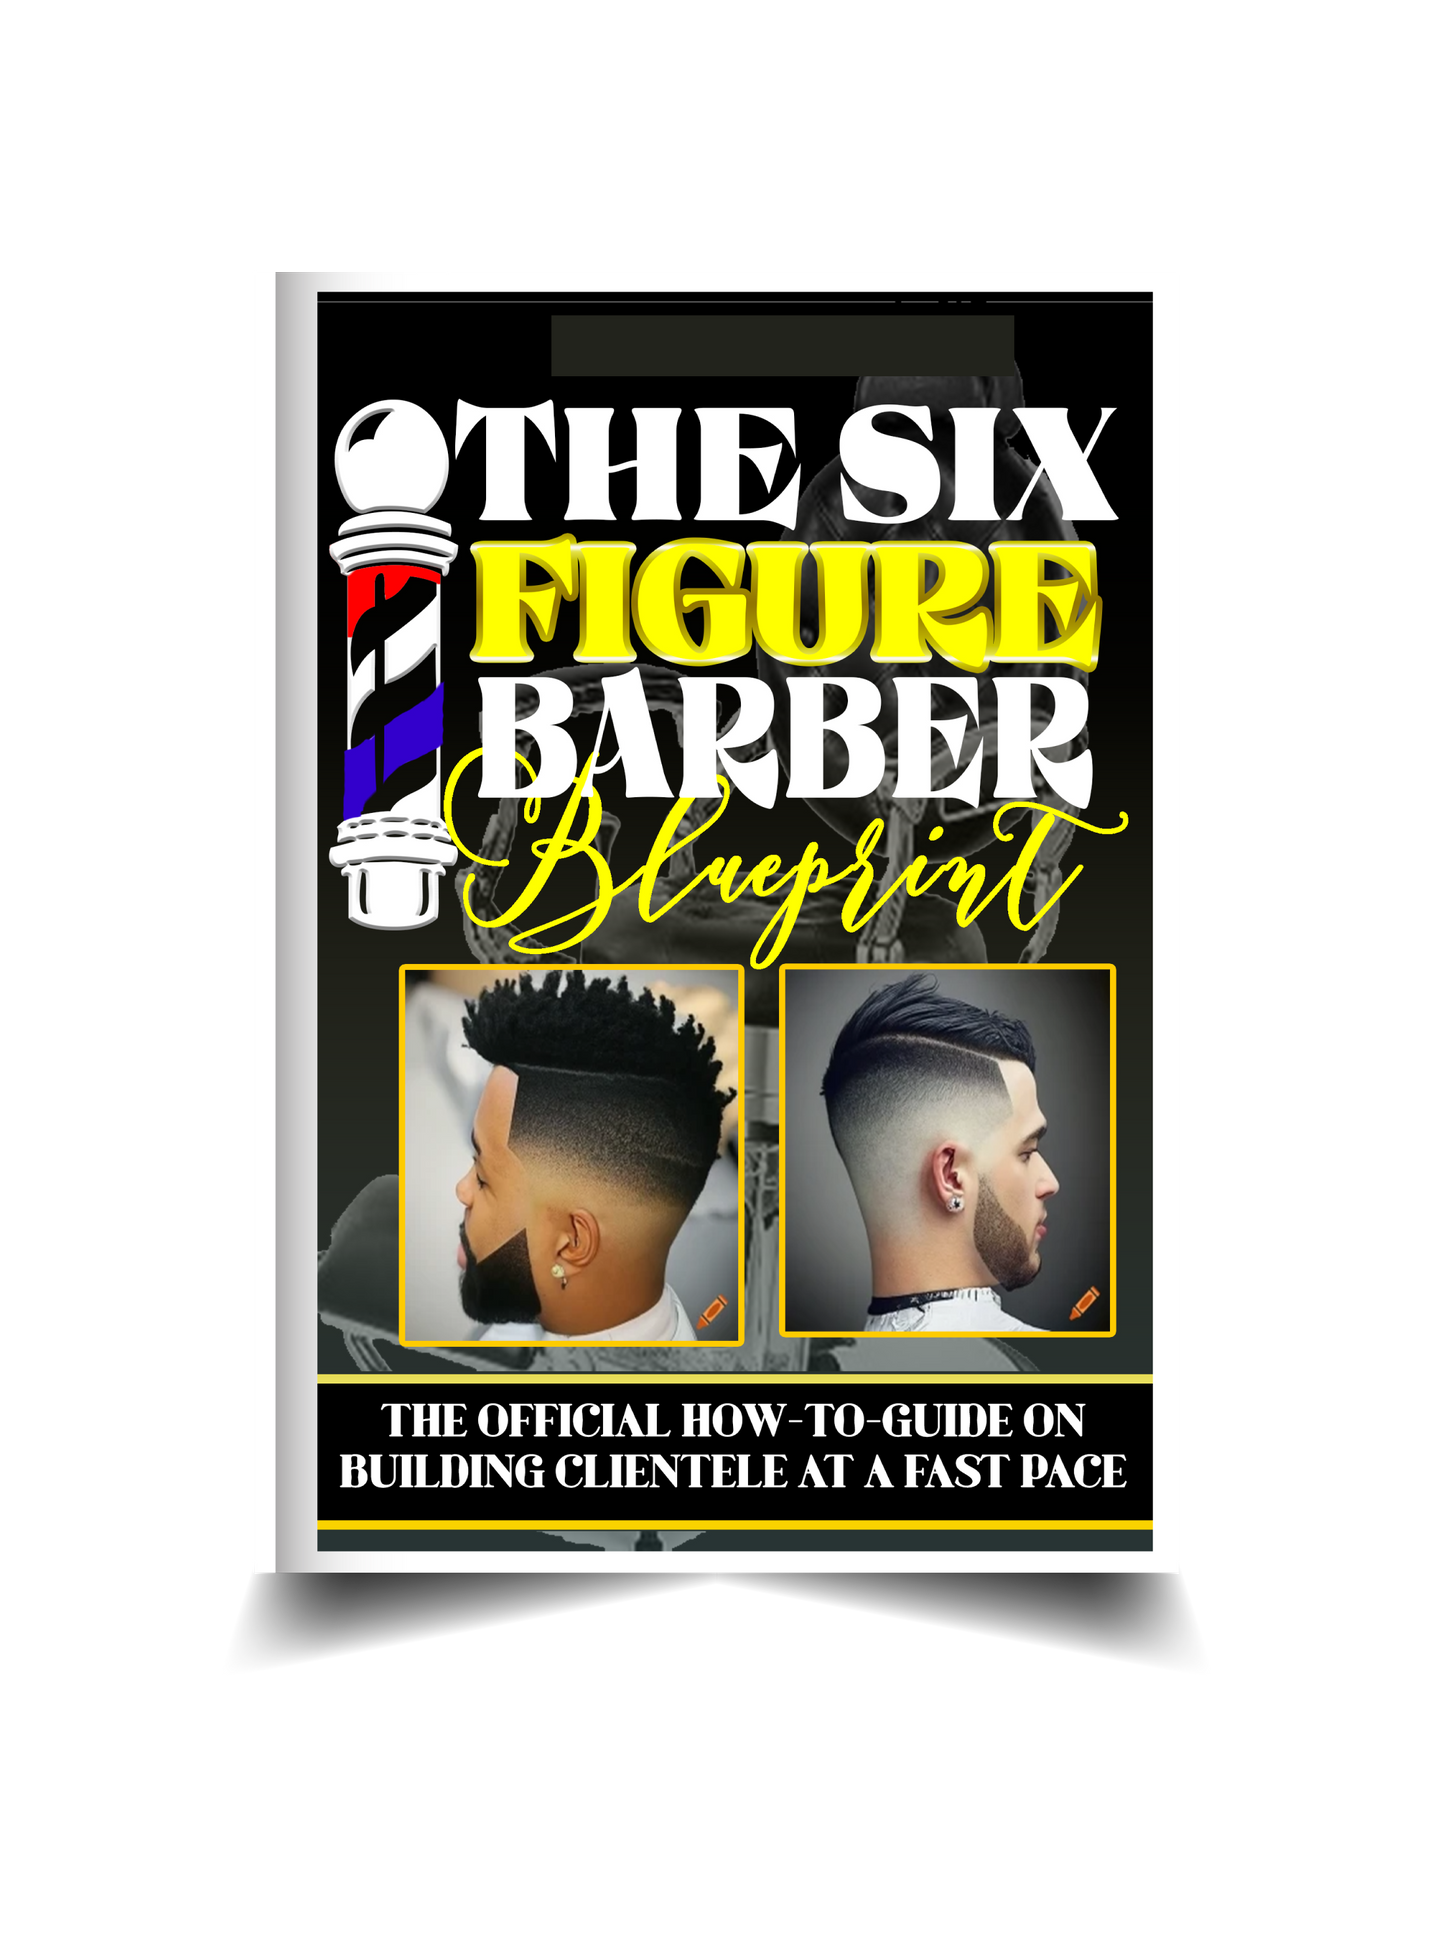 The Six Figure Barber Blueprint: The Official How-To-Guide on Building Clientele At A Fast Pace